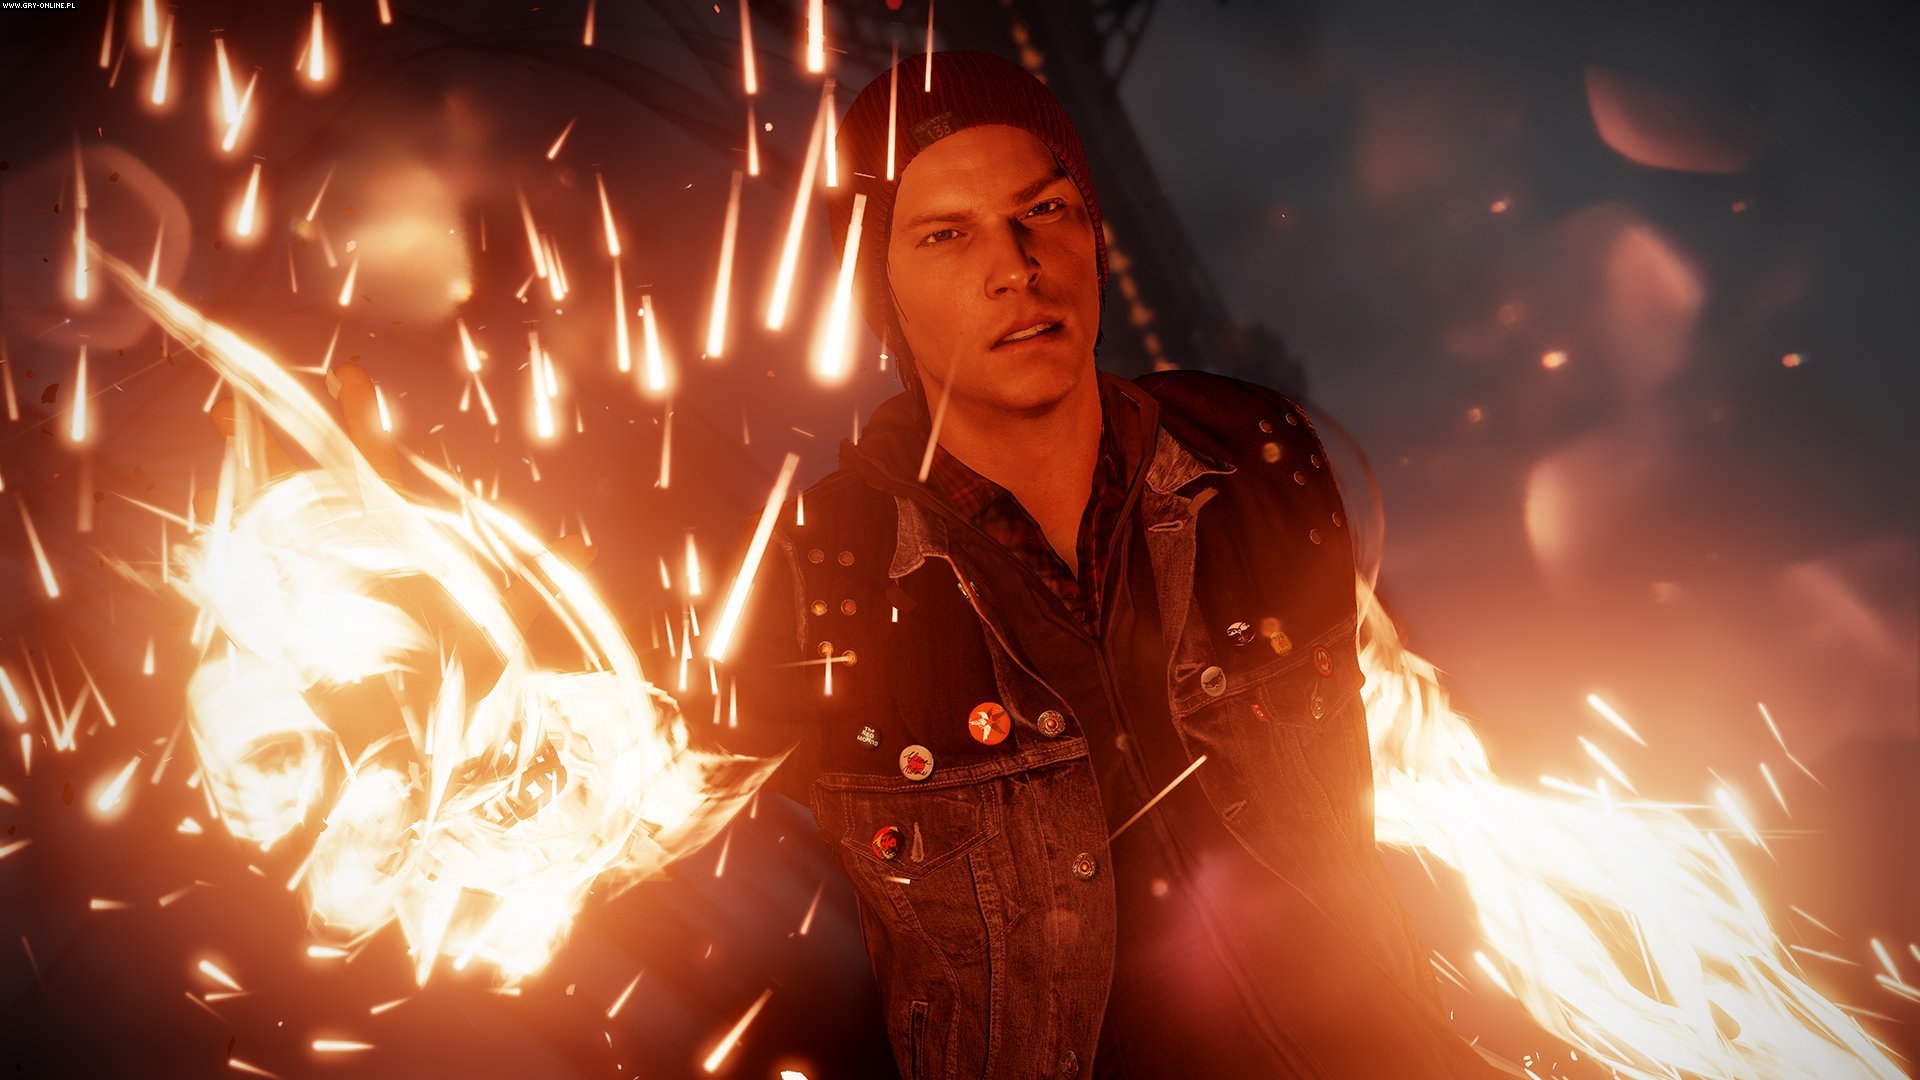 infamous second son wallpaper,sparkler,fictional character,movie,fire